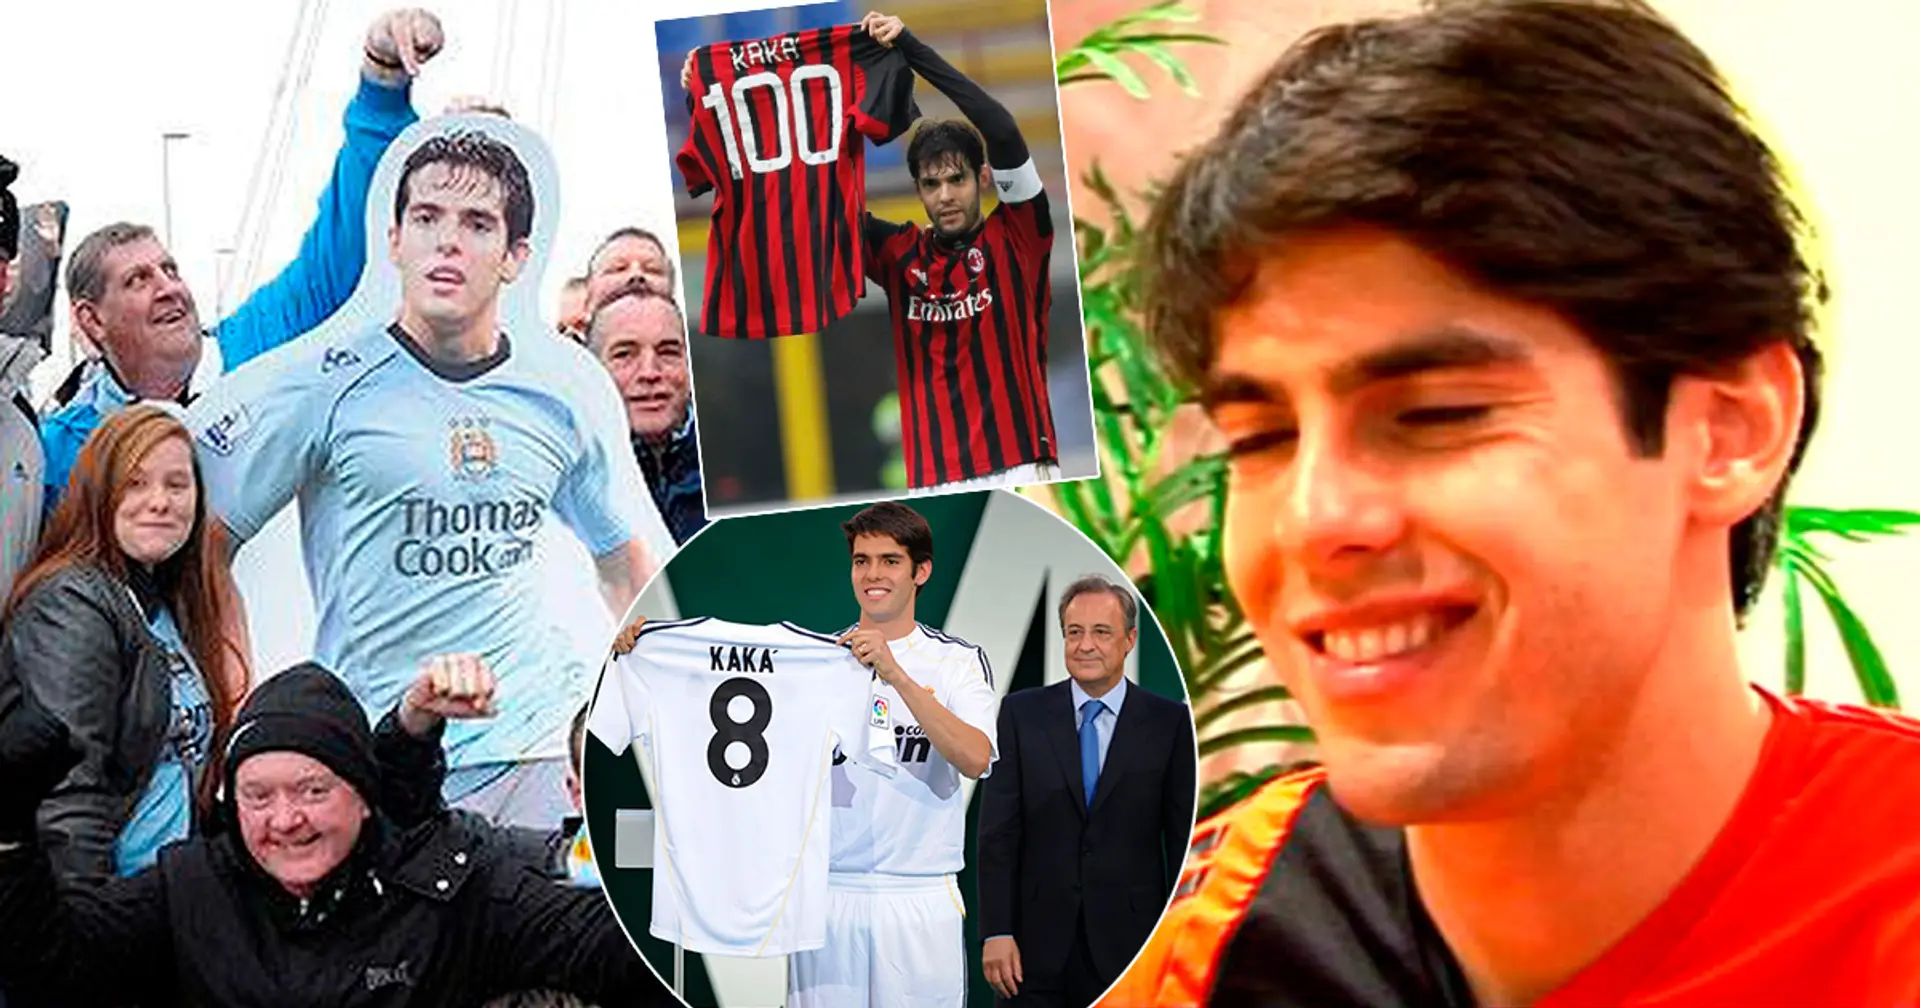 'The situation messed me up': Kaka reveals why he snubbed a huge Manchester City deal and moved to Real Madrid in 2009  